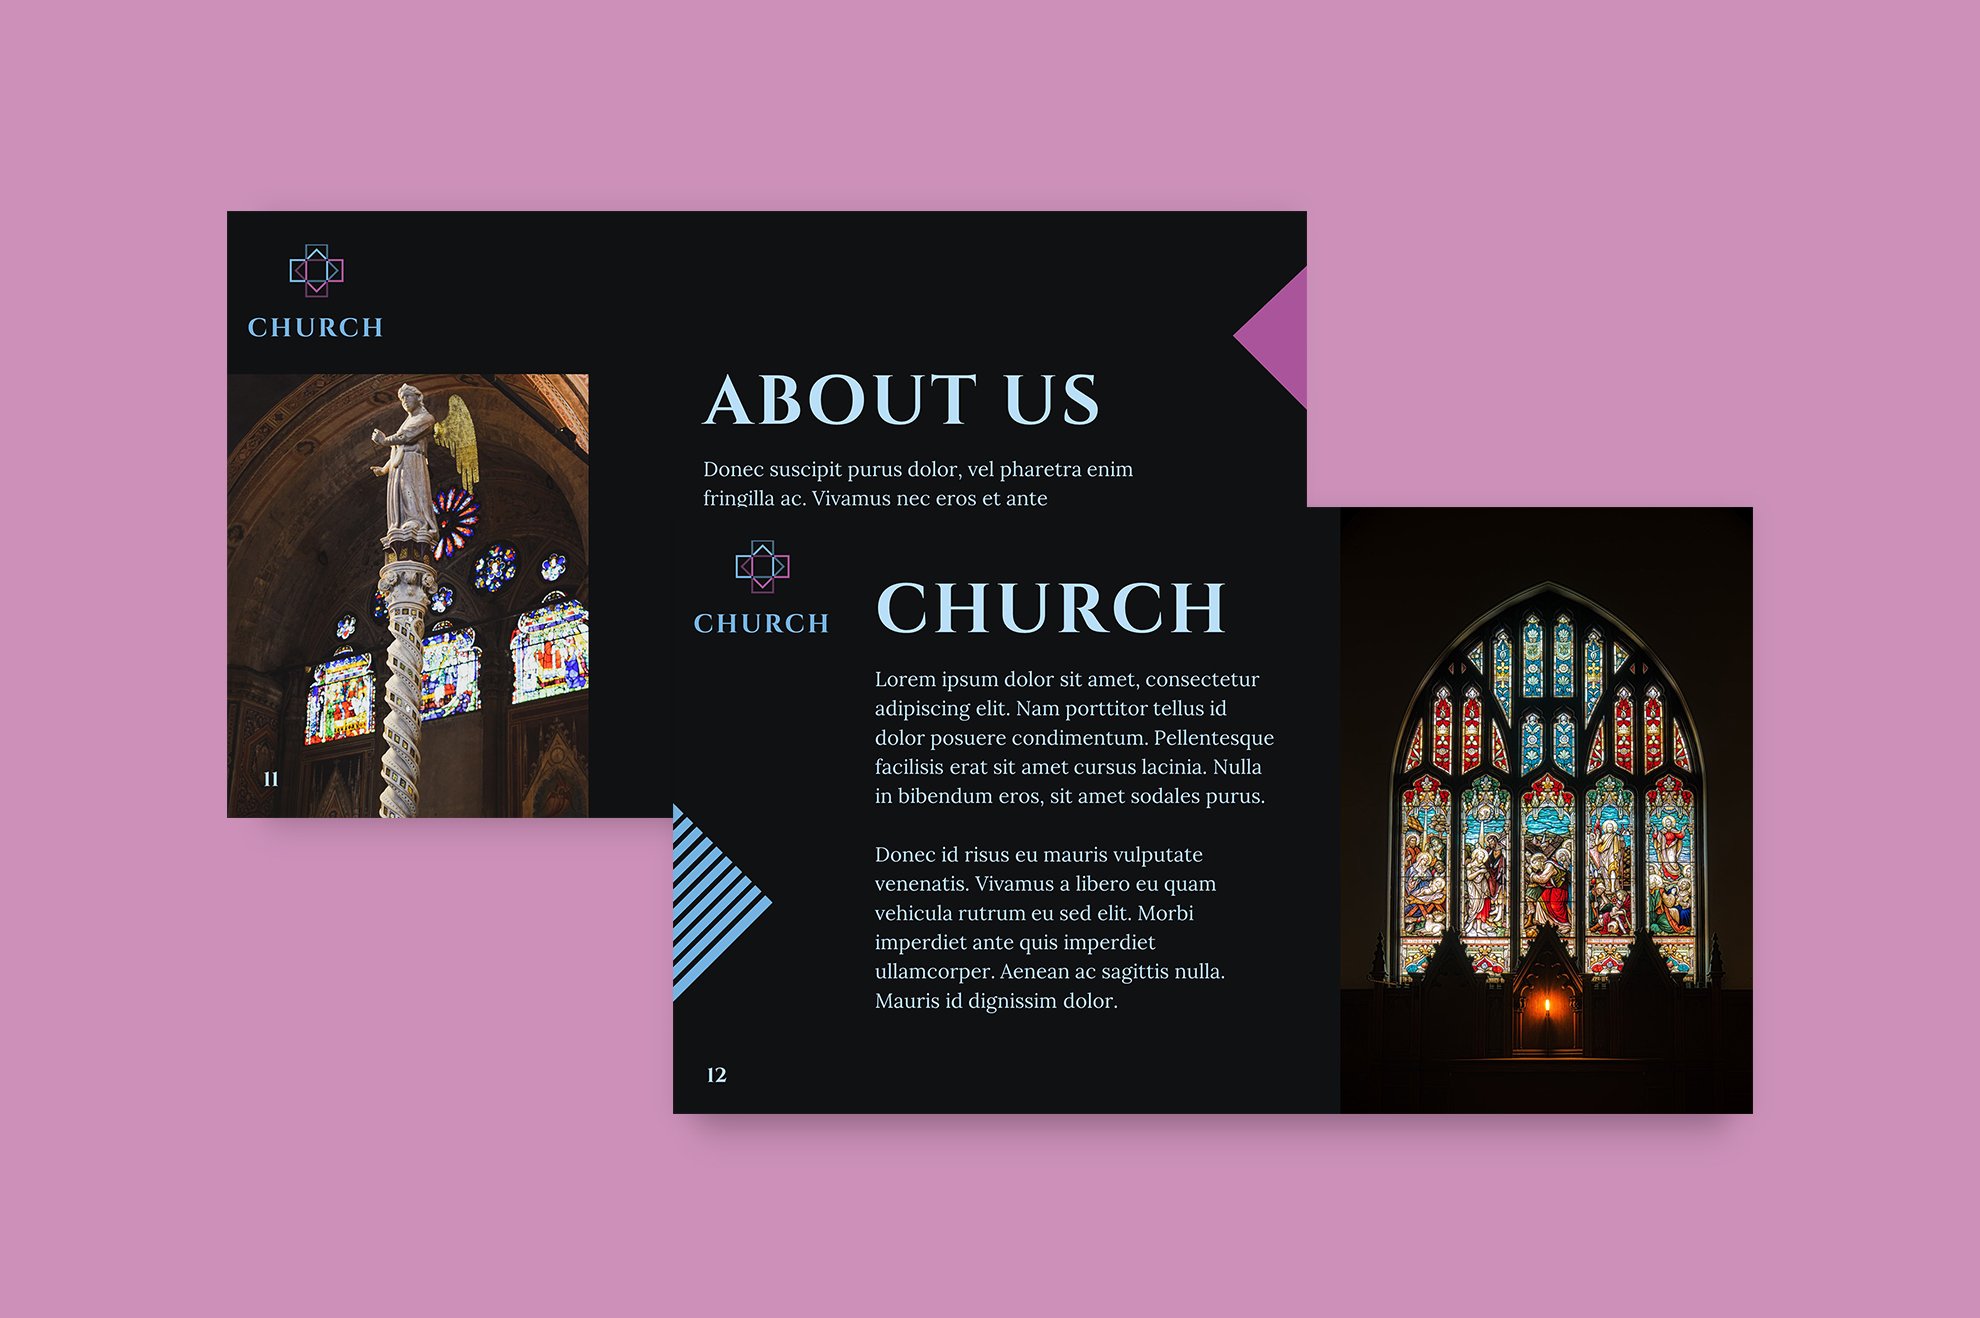 Cool template not just for church topics.